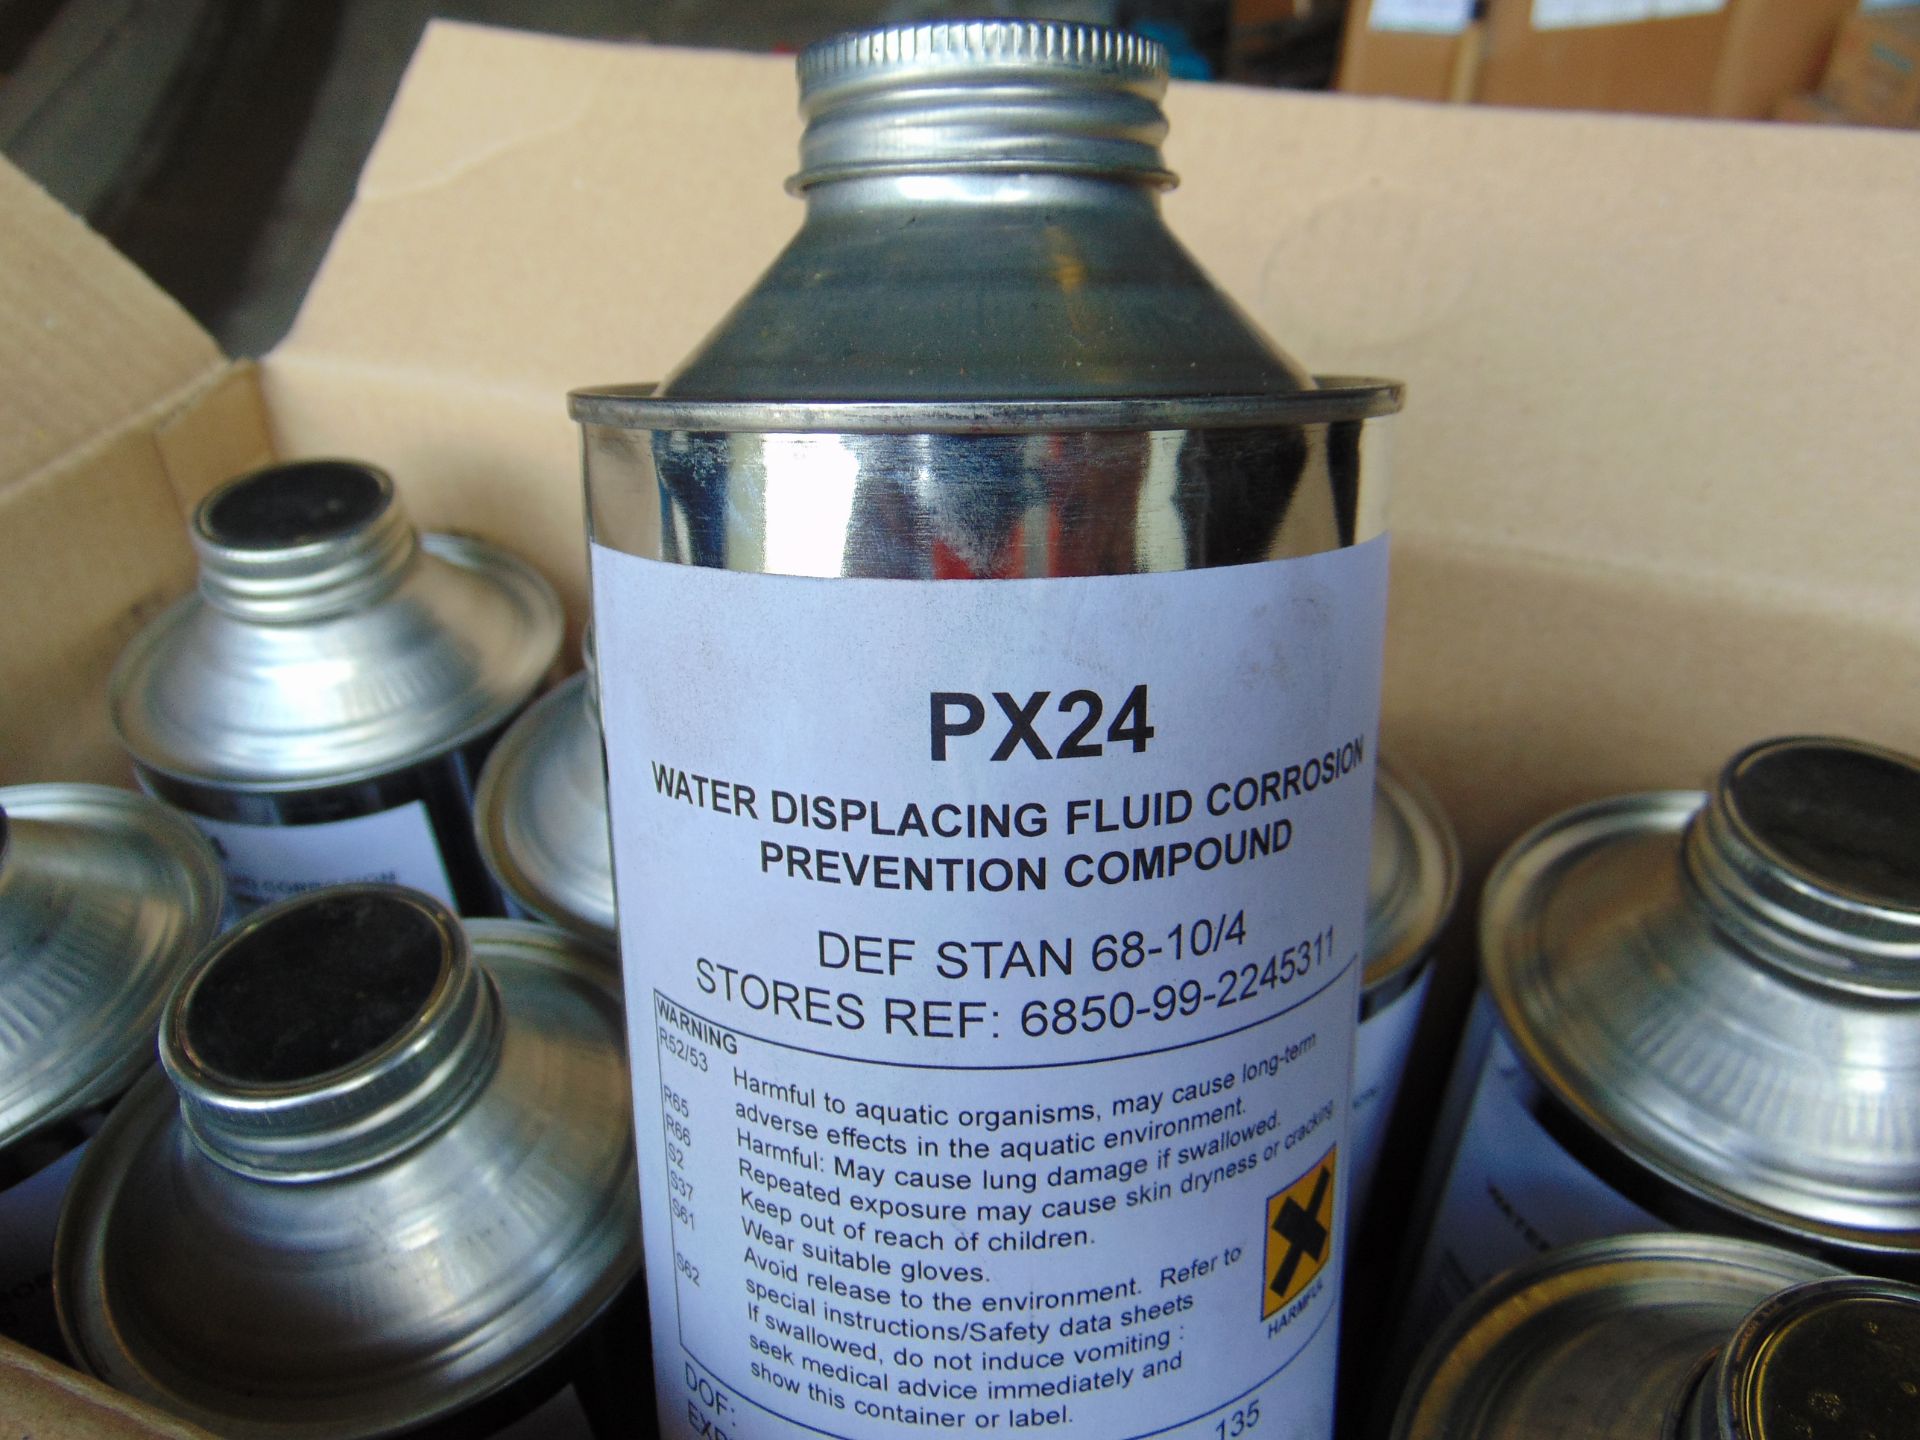 16 x 1 Ltr Bottles of PX24 Water Displacing Fluid Corrosion Prevention Compound - Image 3 of 6